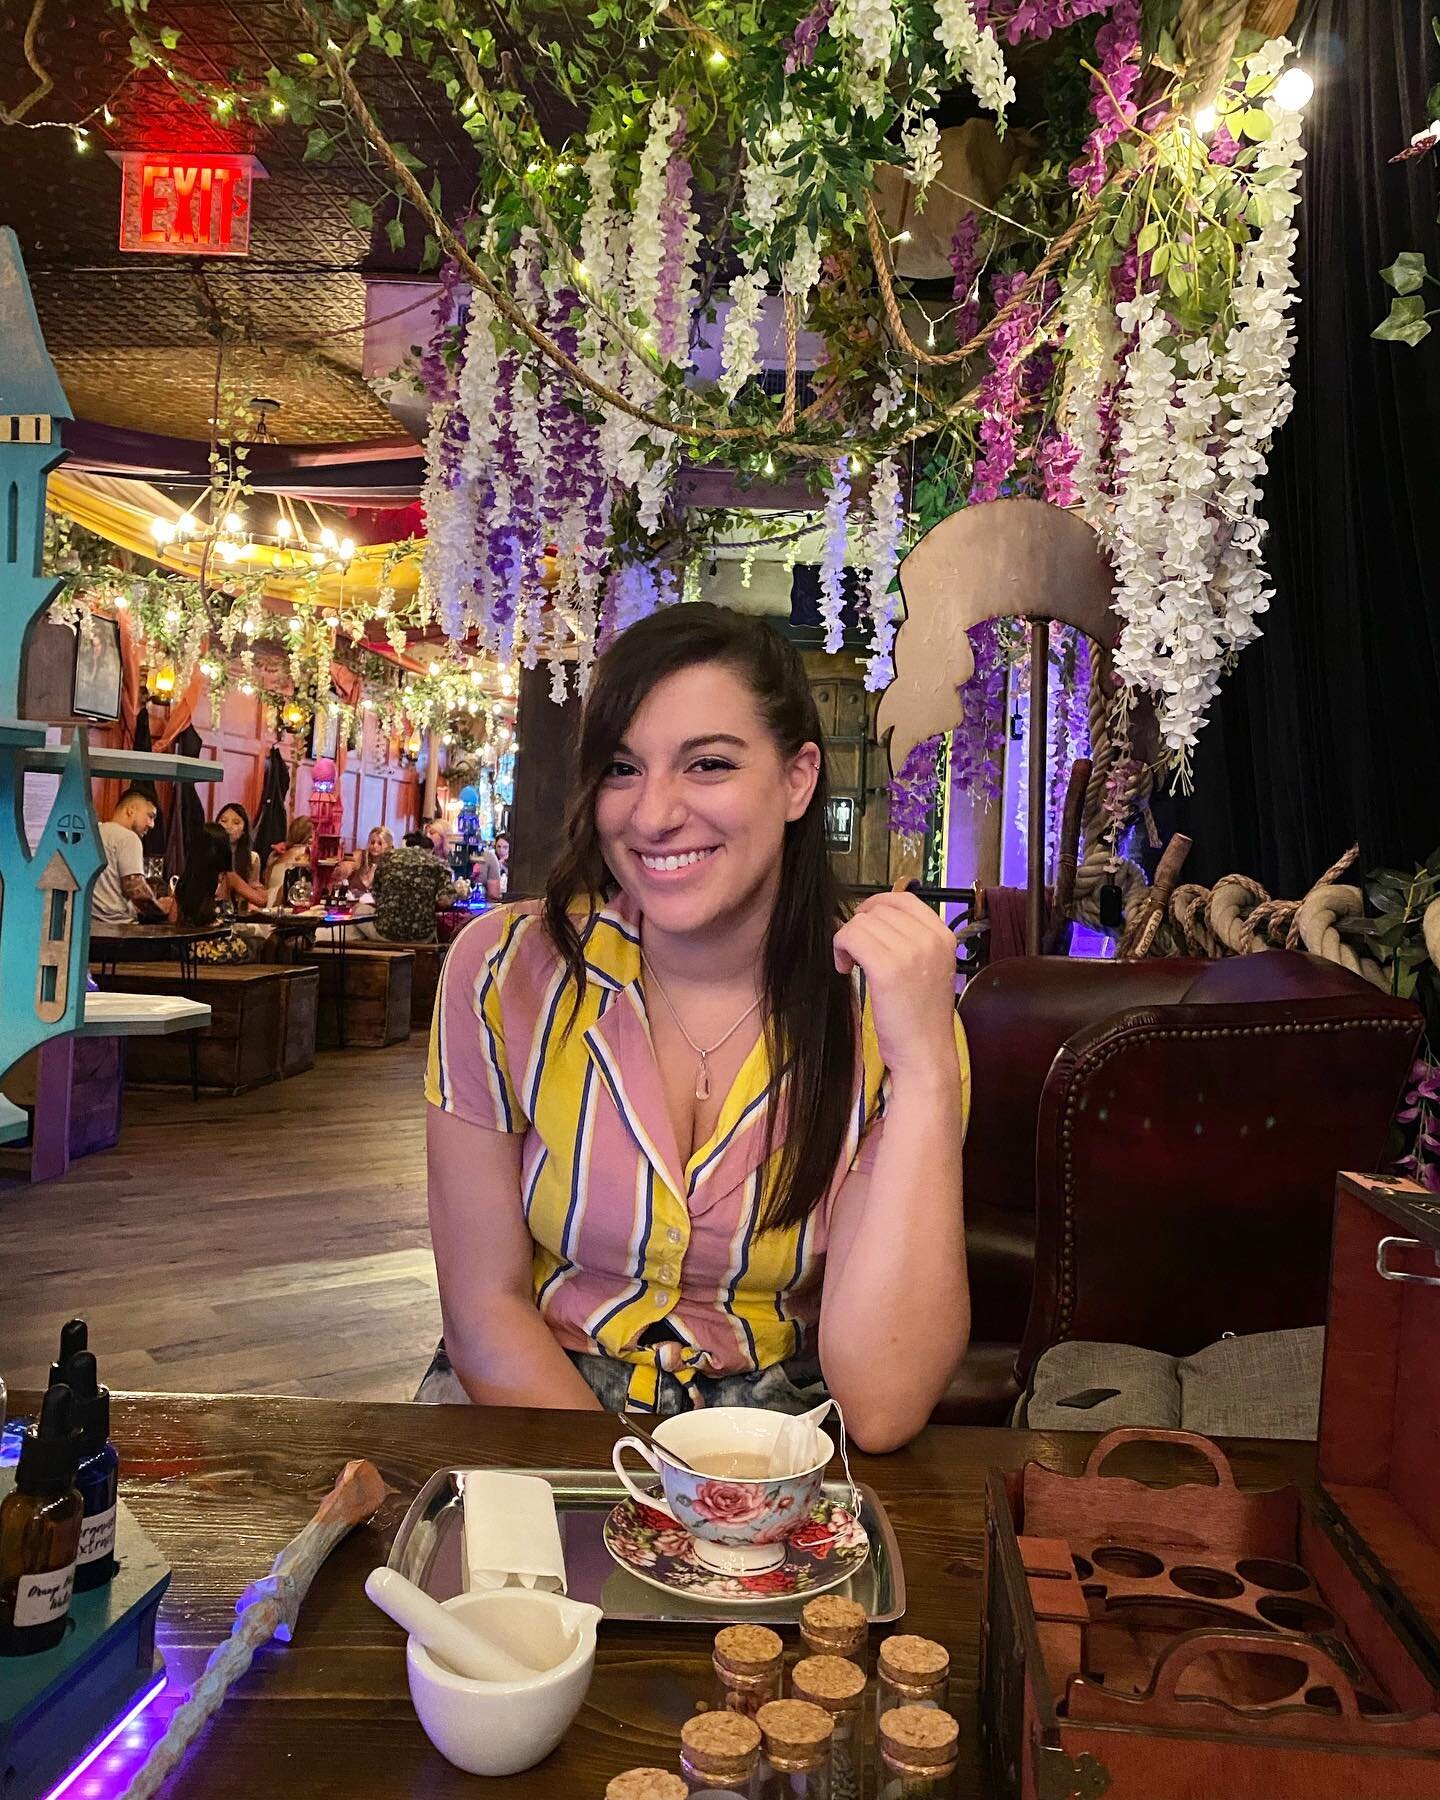 We had a ✨magical day✨ making potions and eating lil treats at @thecauldronnyc this weekend! 10/10 would magic again💖 (We went for tea time but they have magical cocktails at night, too!)